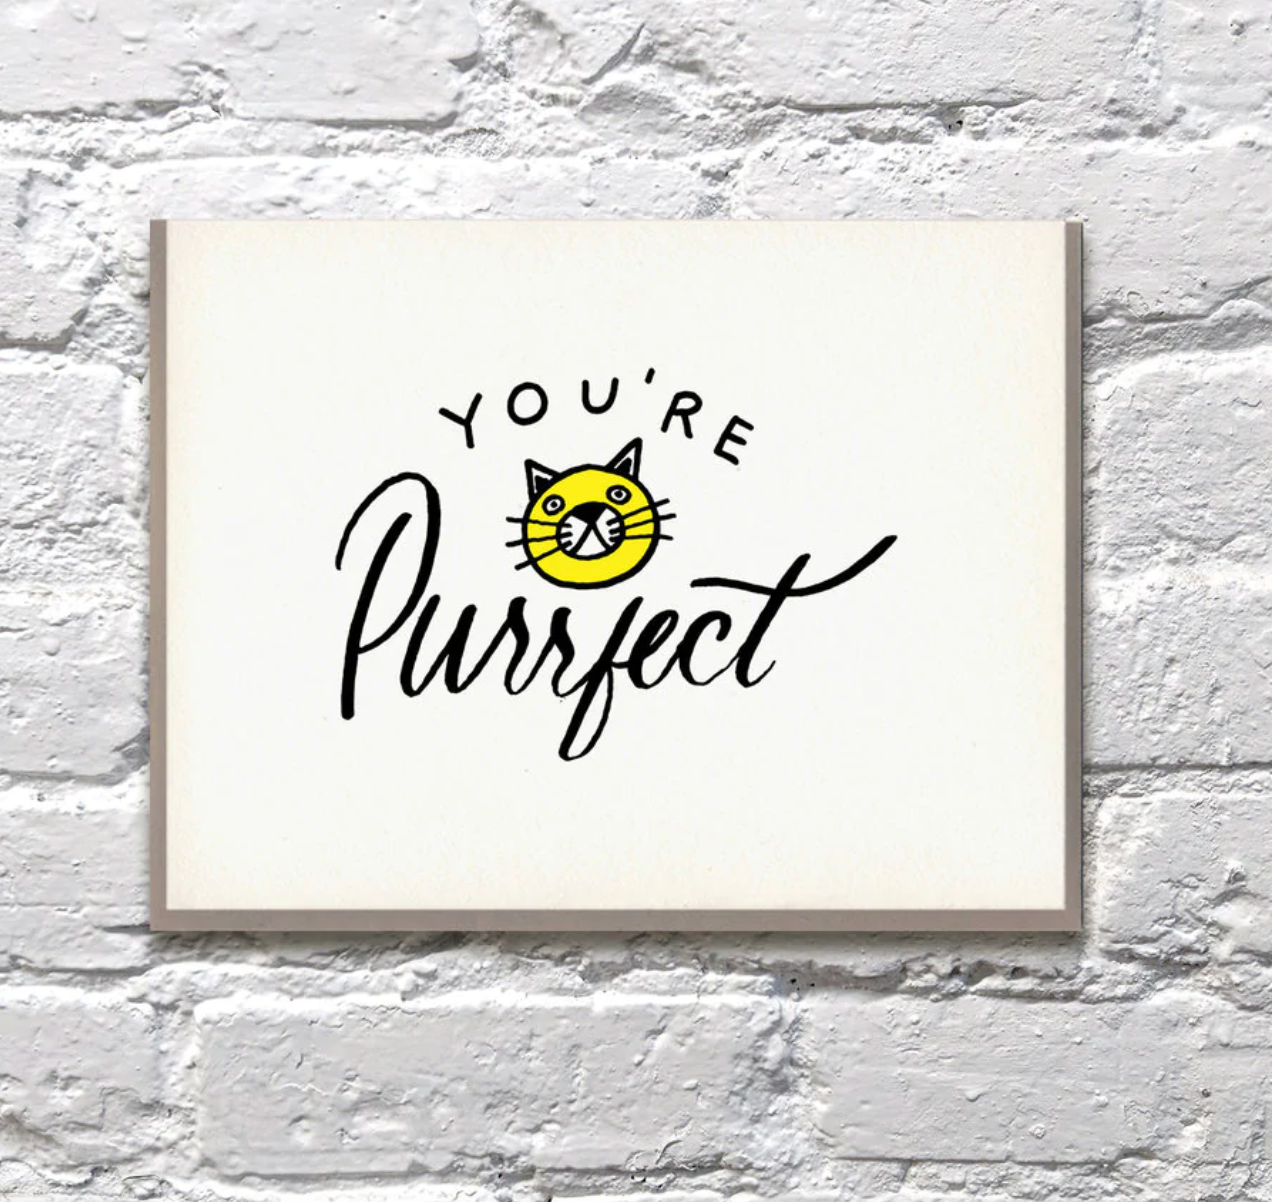 "You're Purrfect" - Greeting Card